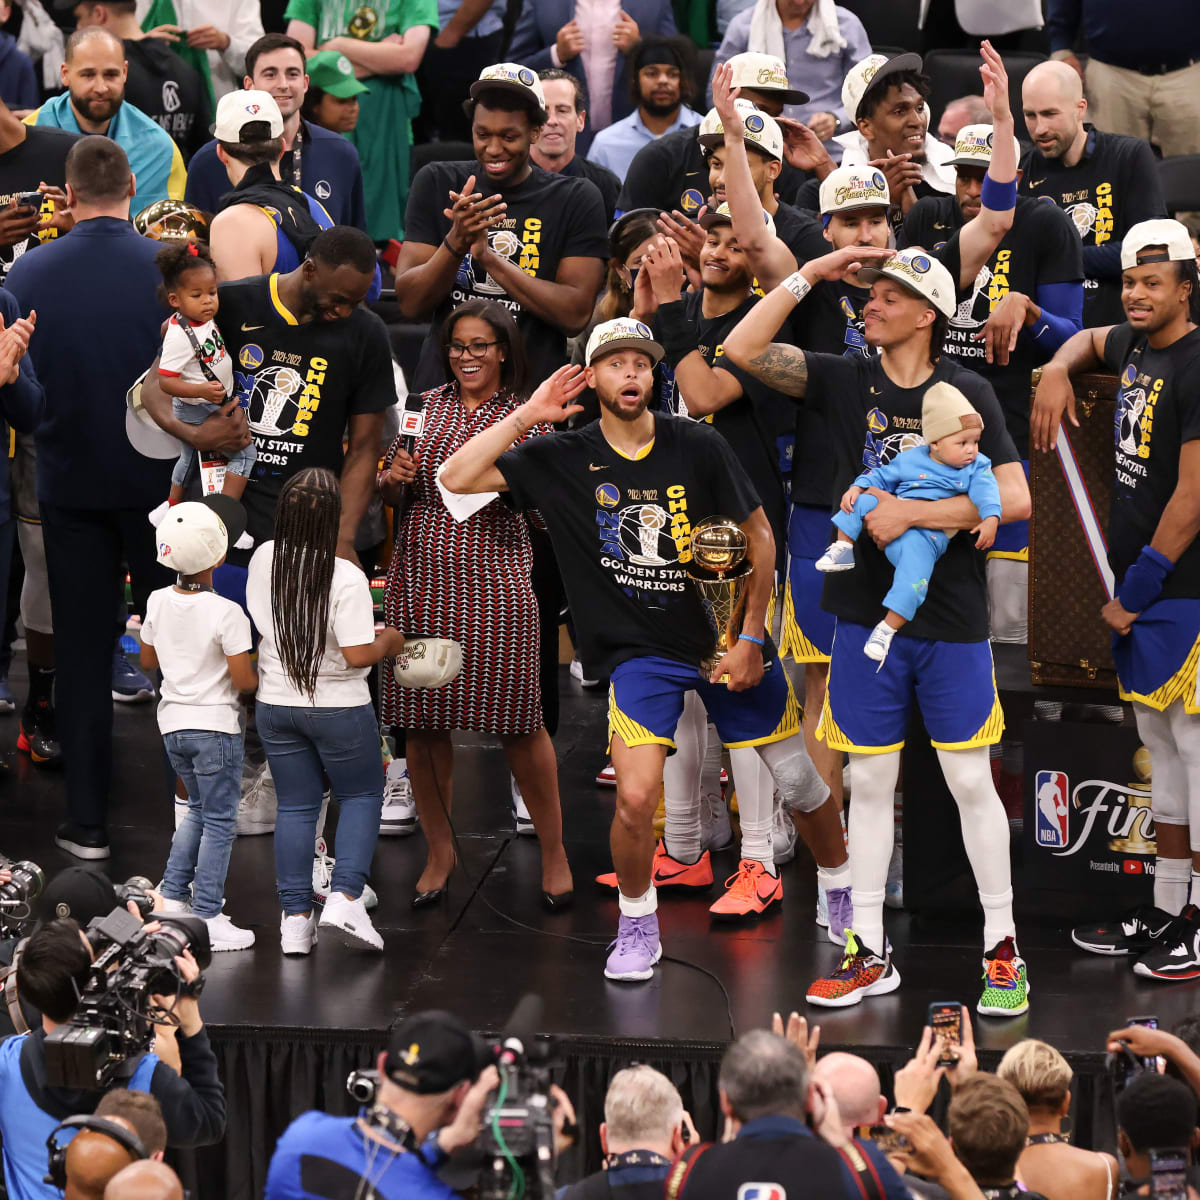 Stephen Curry receives NBA Finals MVP award for 1st time in his